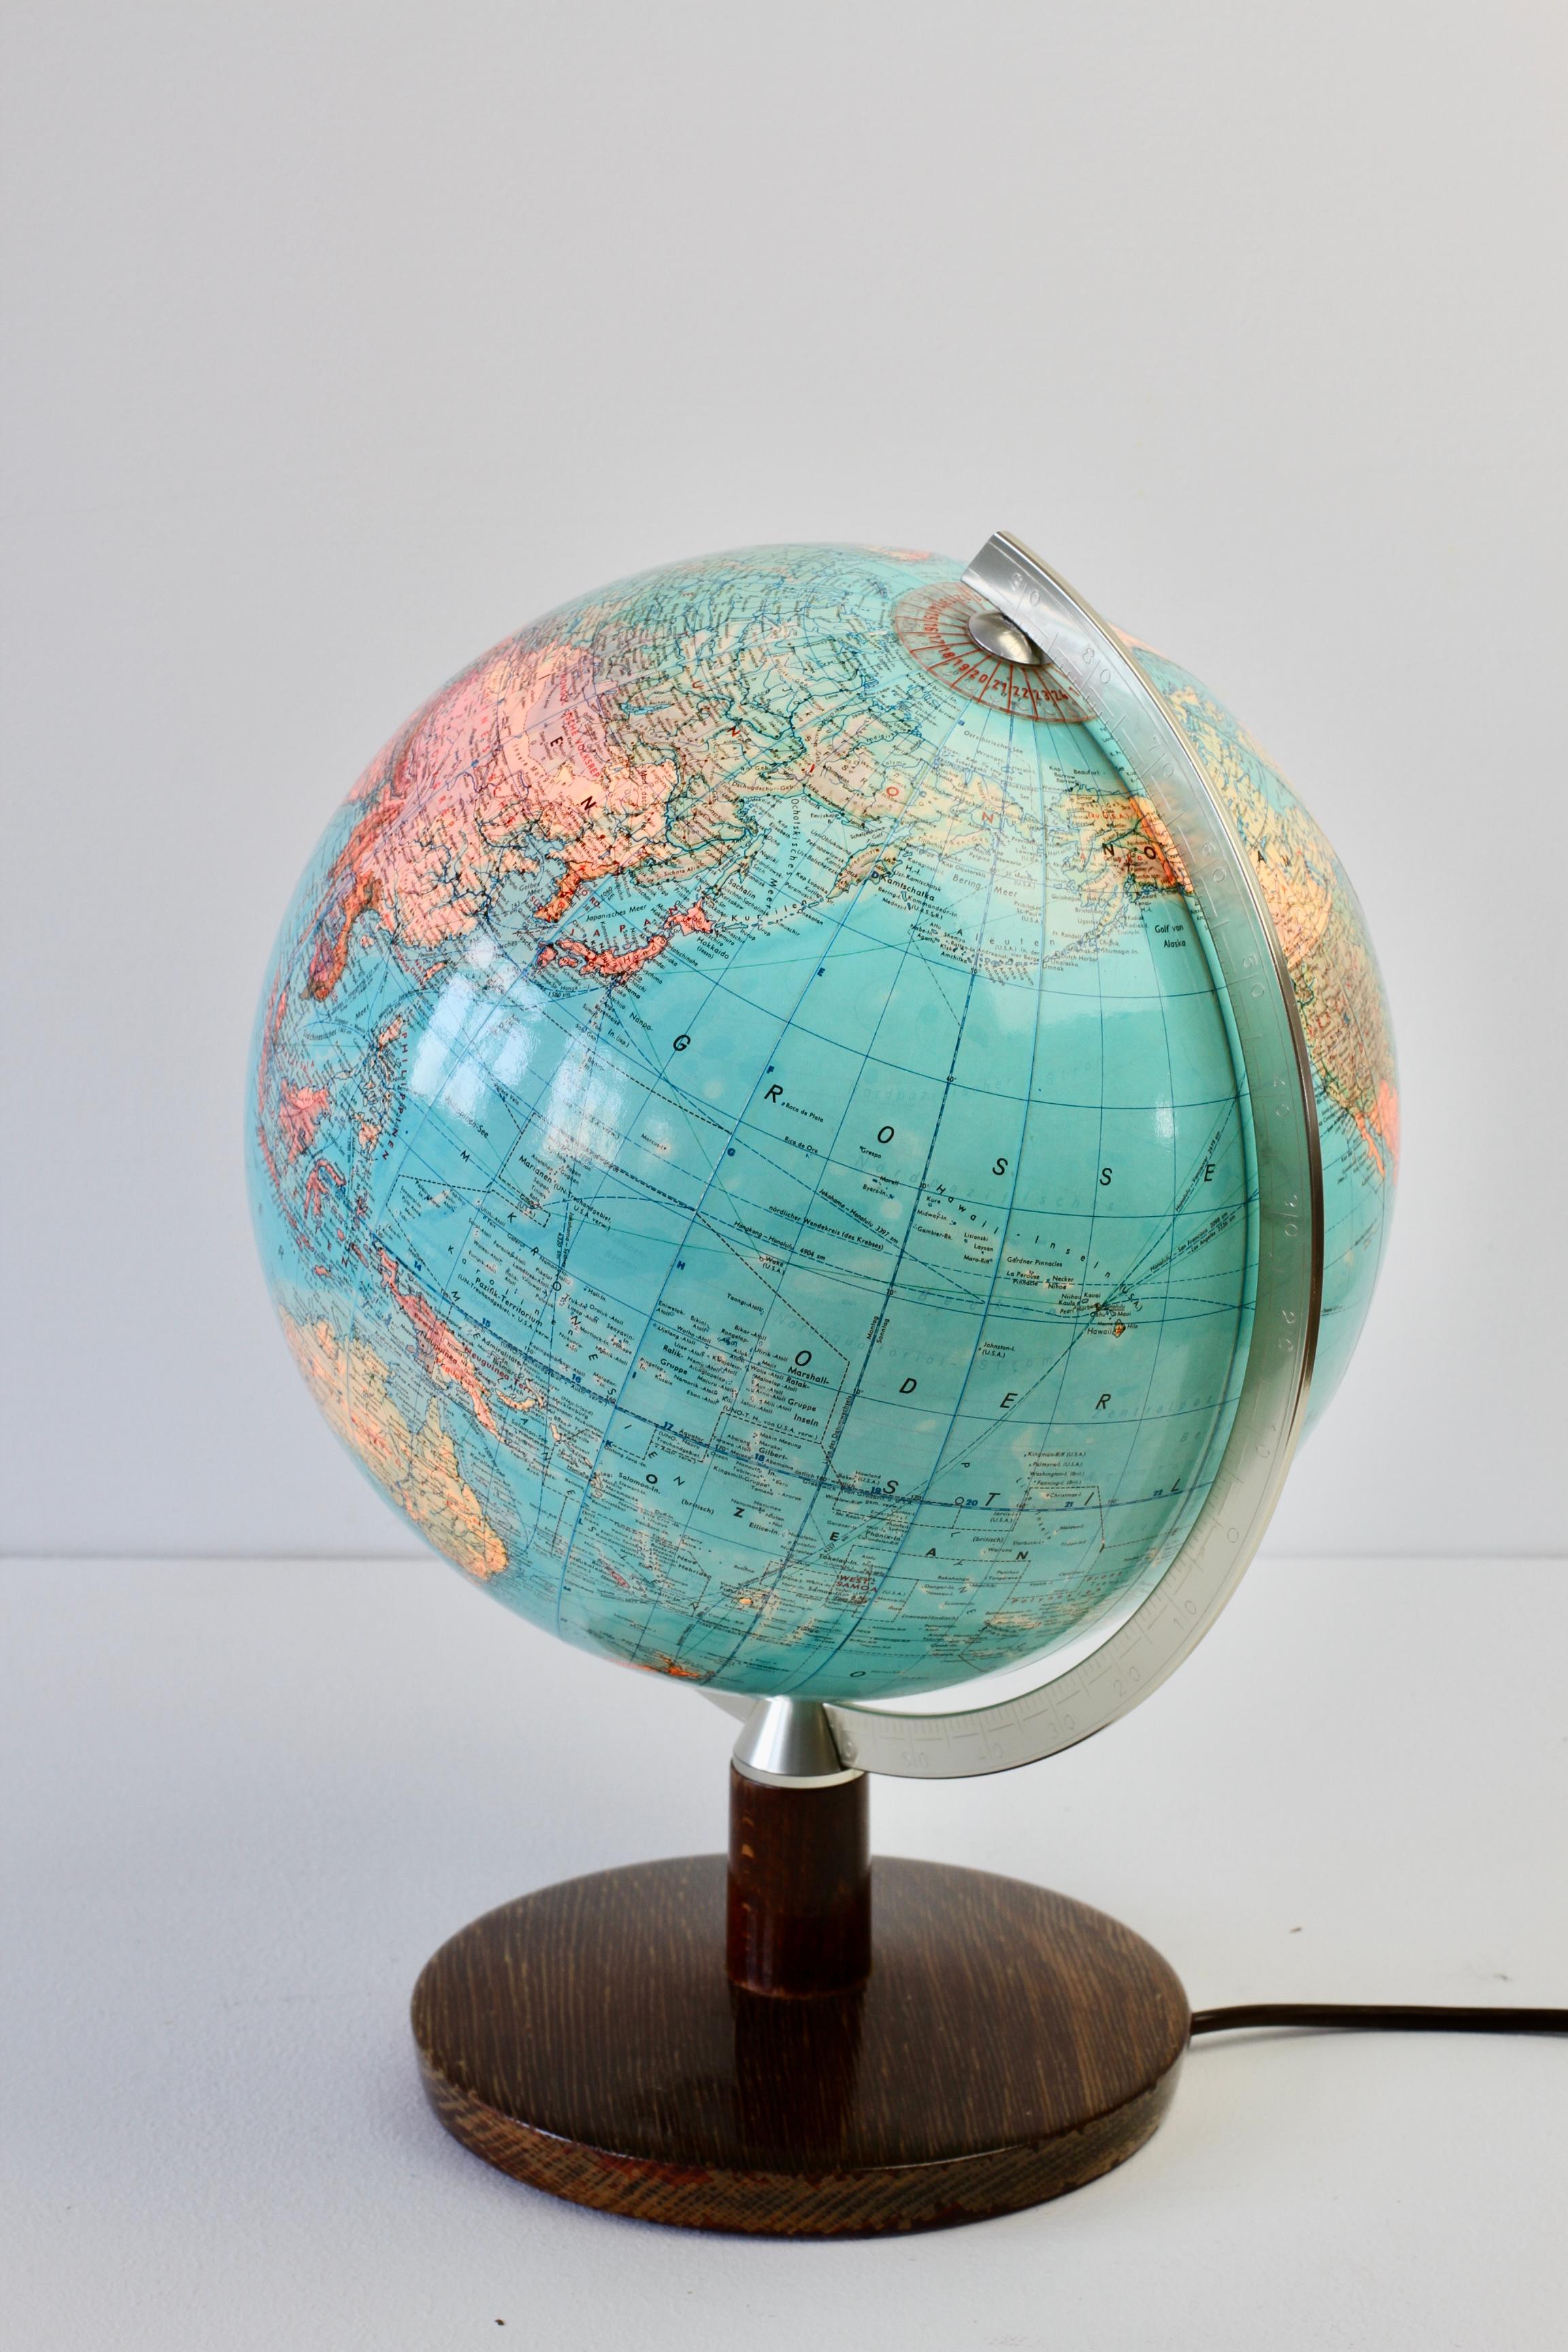 Wonderful vintage Mid-Century fun world map globe table lamp or desk light by JRO-Verlag München. Made in Germany circa 1970, this whimsical lamp would make a great child's bedside table lamp or as a desk lamp - perfect for keeping a warm glow at